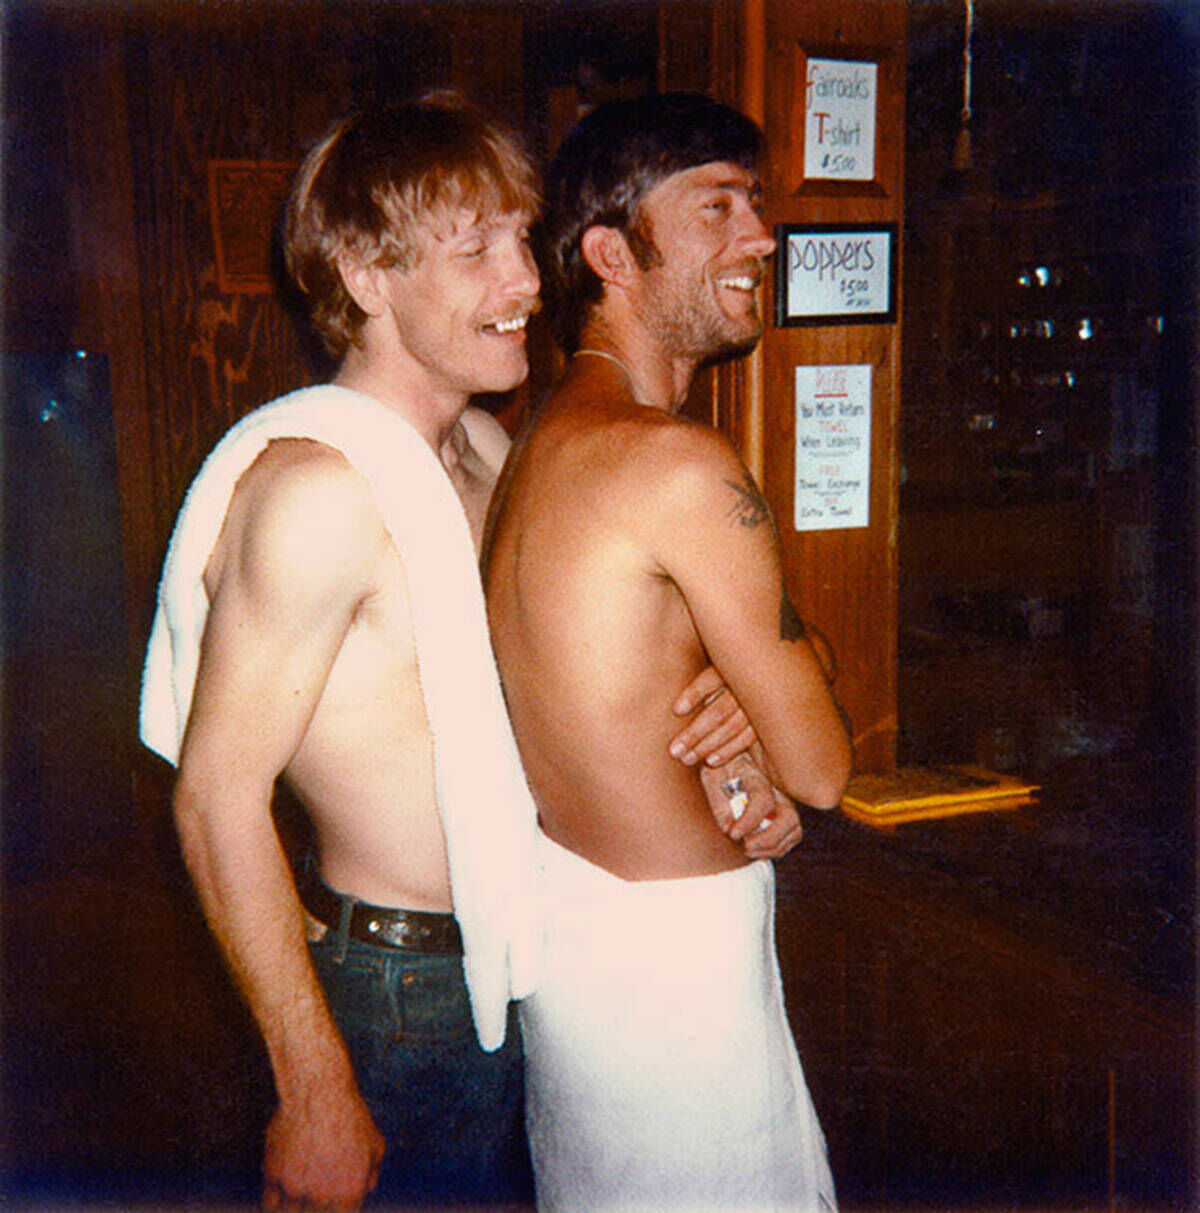 Legal after 40 years, the gay bathhouse faces identity crisis Archives sfexaminer